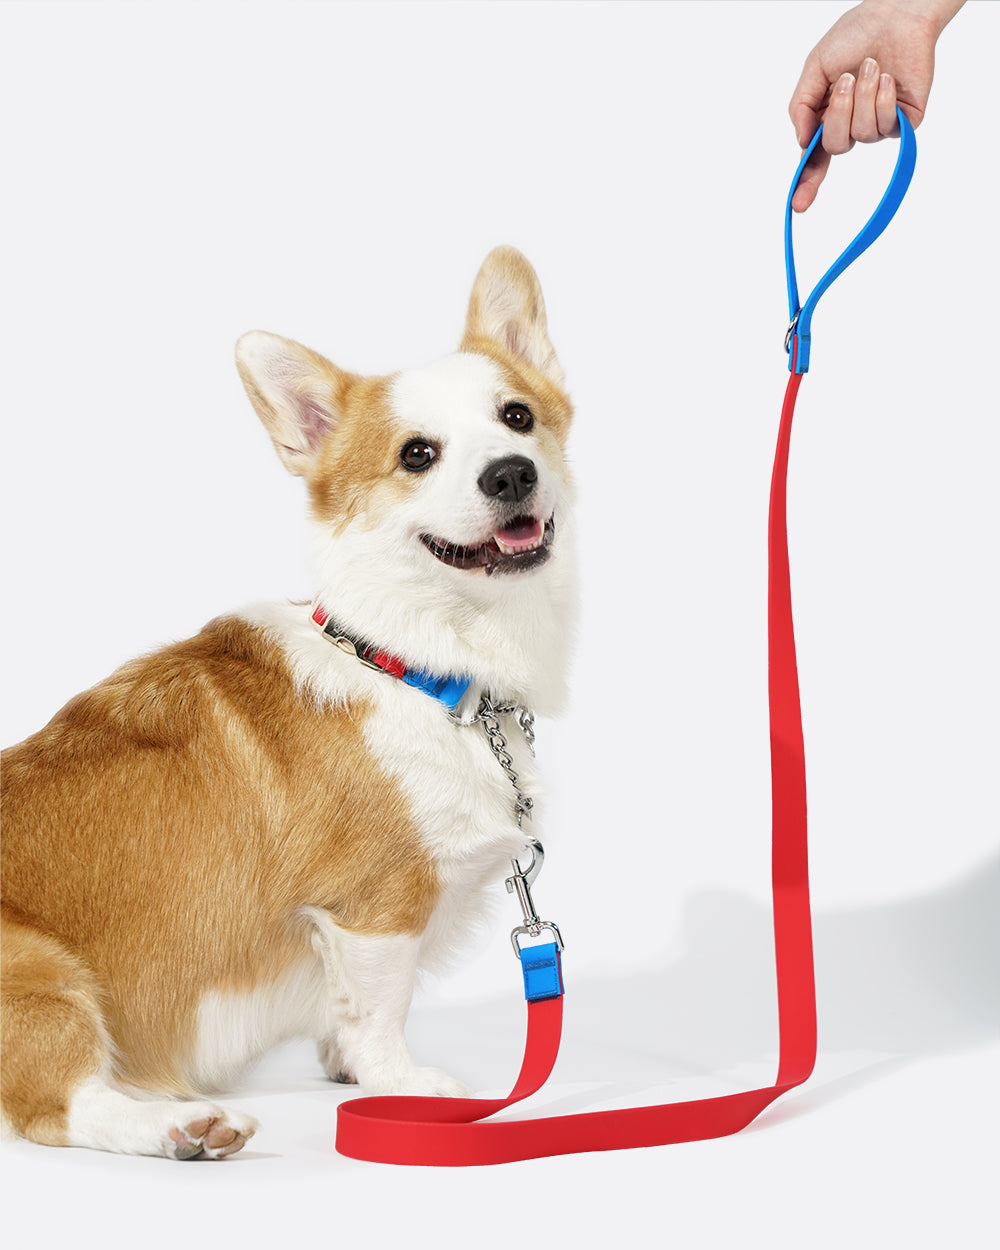 A waterproof dog leash made with PVC material, equipped with a metal D-ring on the handle for attaching a poop bag carrier or key ring, etc. It comes in a red and blue color mix and is available in two width specifications: 2 cm and 2.5 cm.